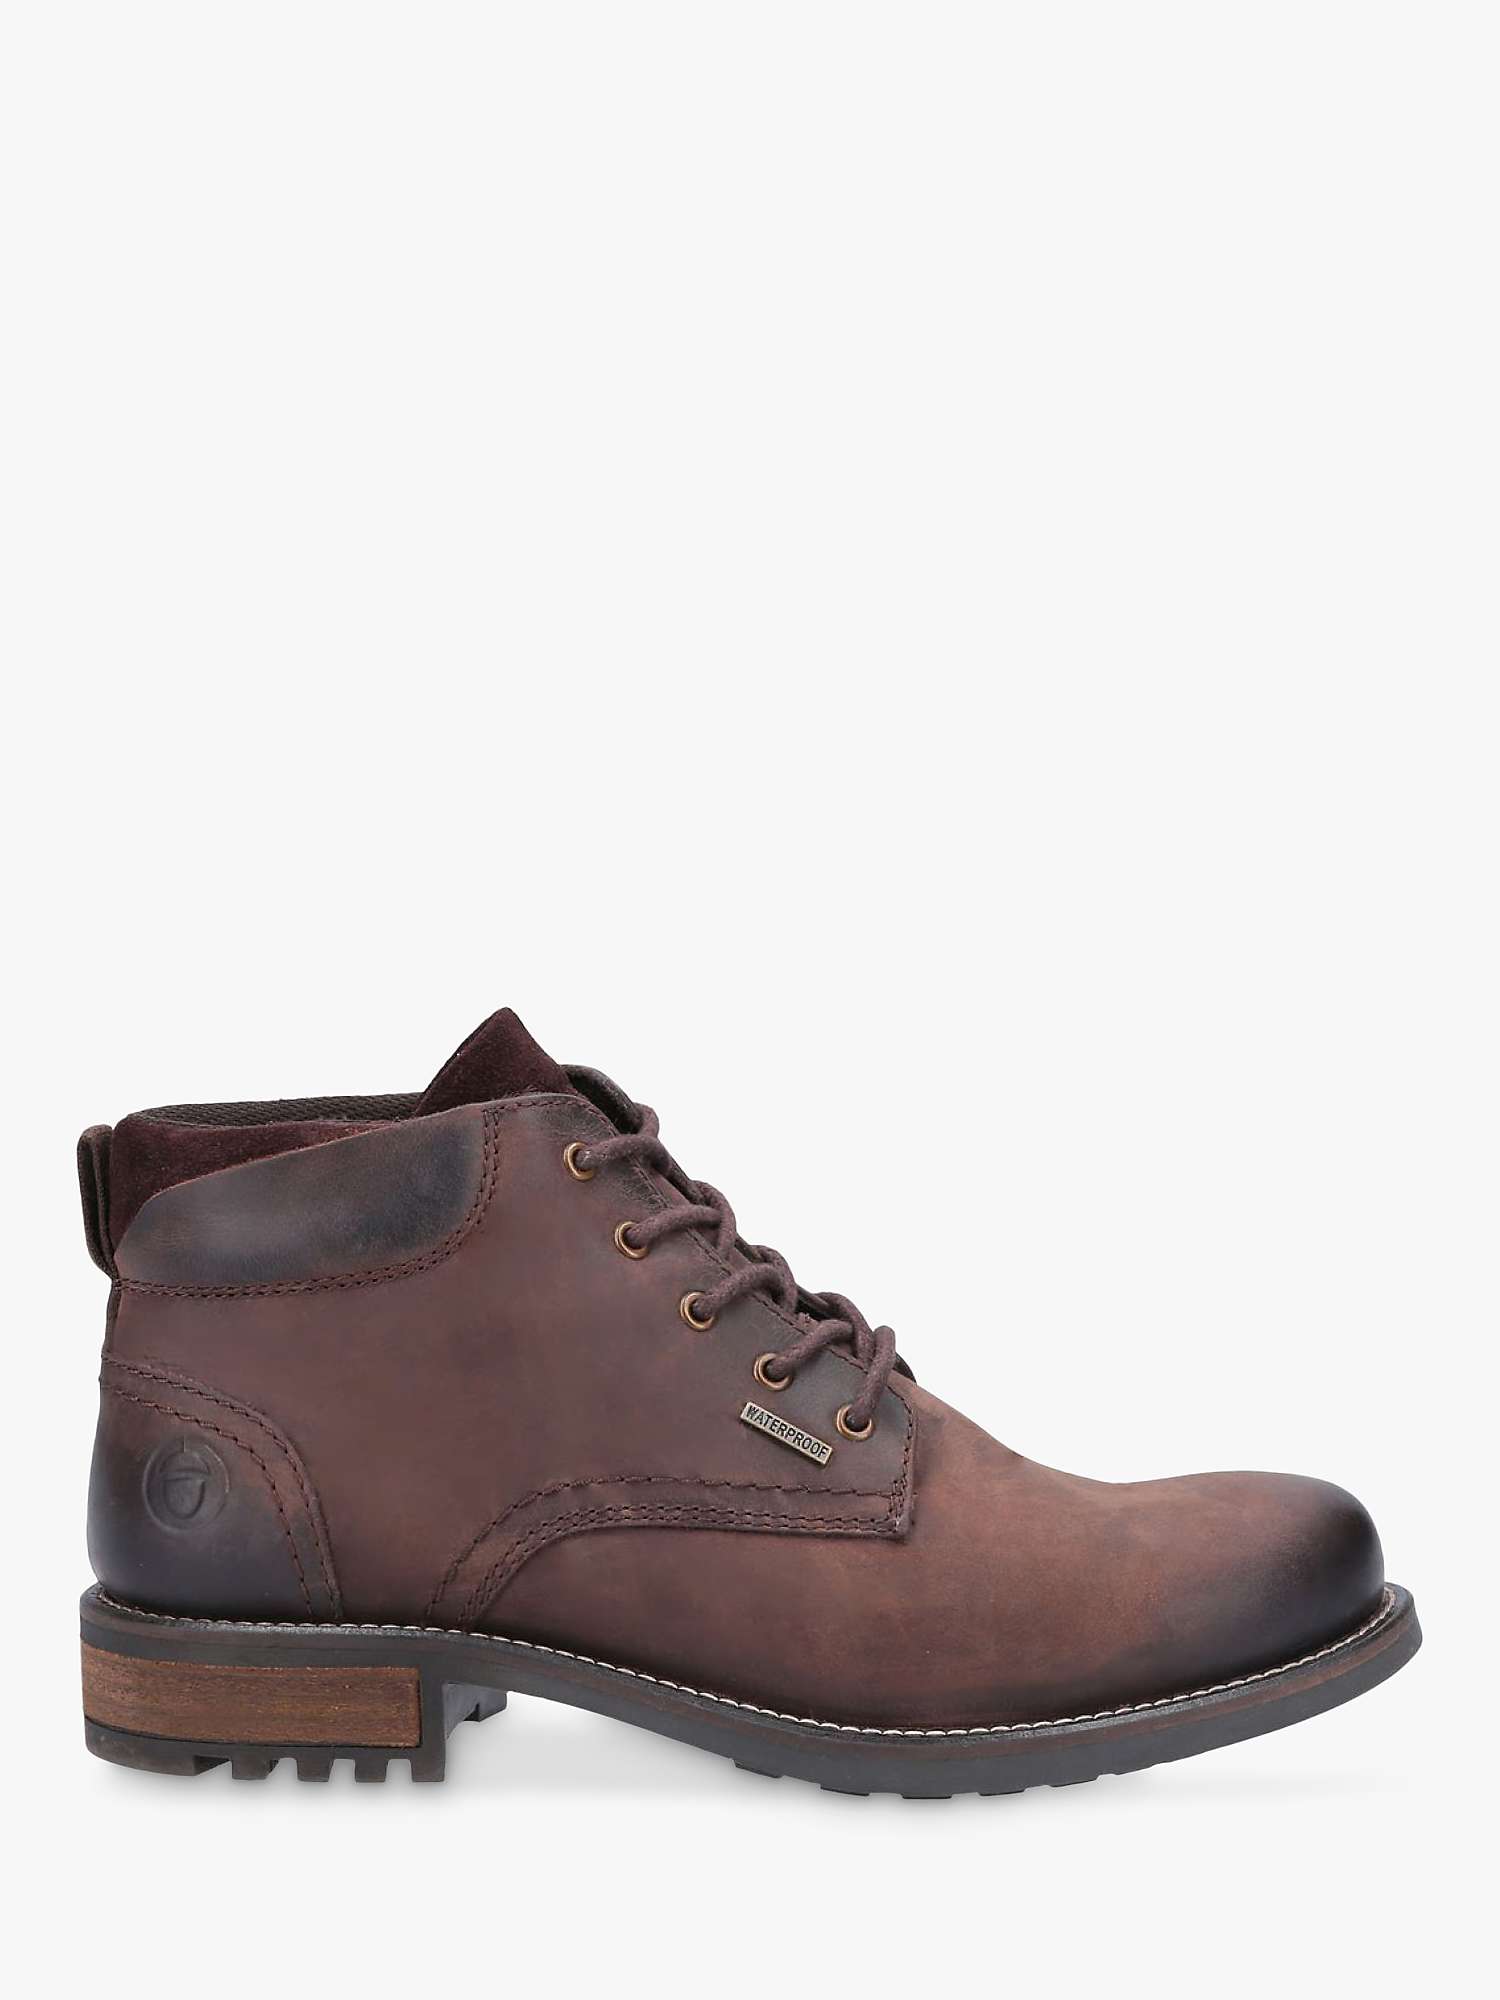 Cotswold Woodmancote Leather Lace Up Boots, Brown at John Lewis & Partners